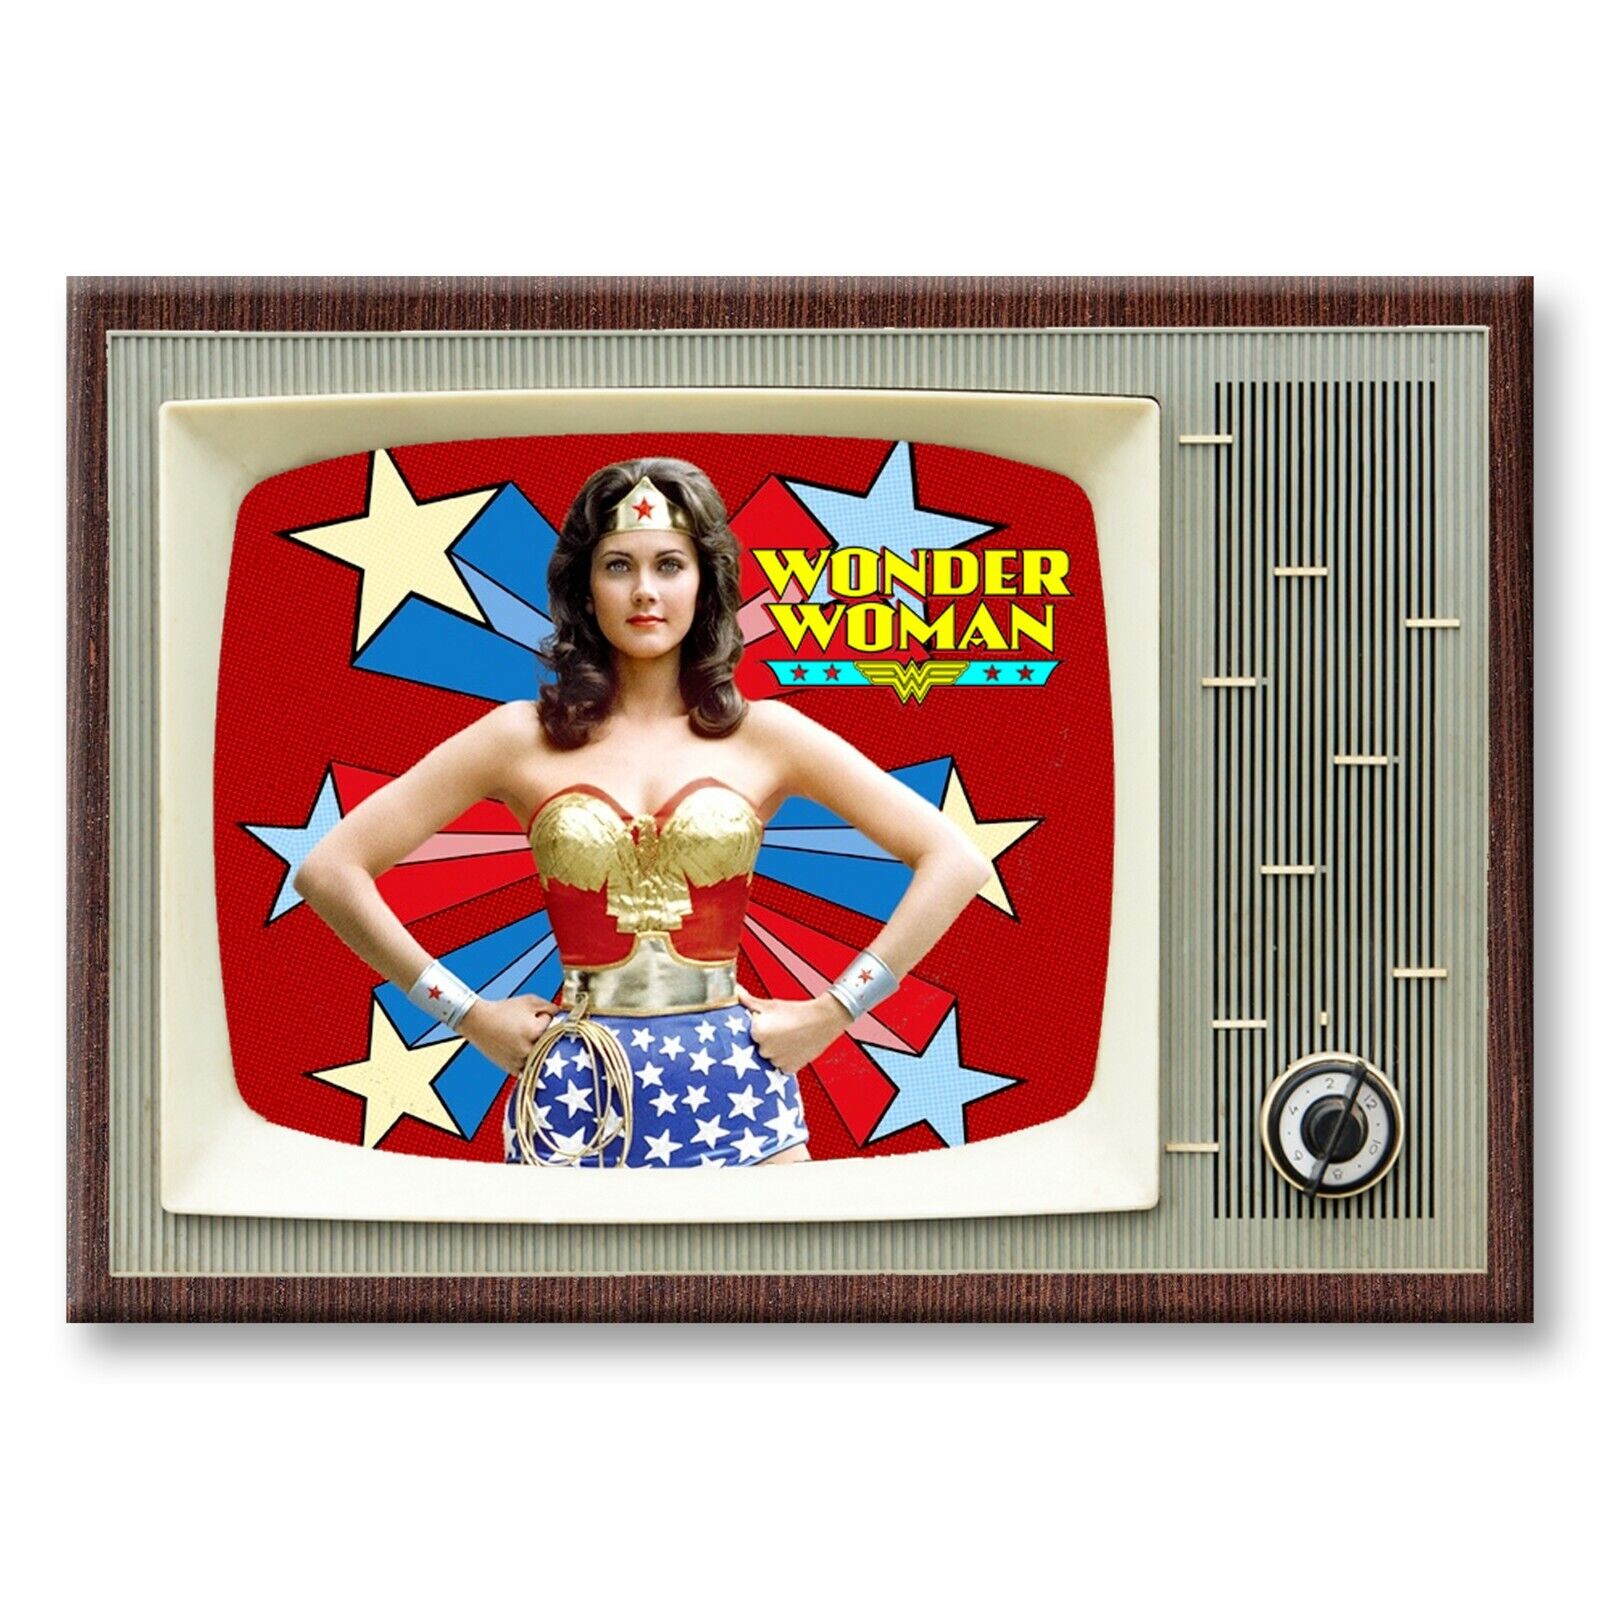 WONDER WOMAN Classic TV 3.5 inches x 2.5 inches Steel Cased FRIDGE MAGNET